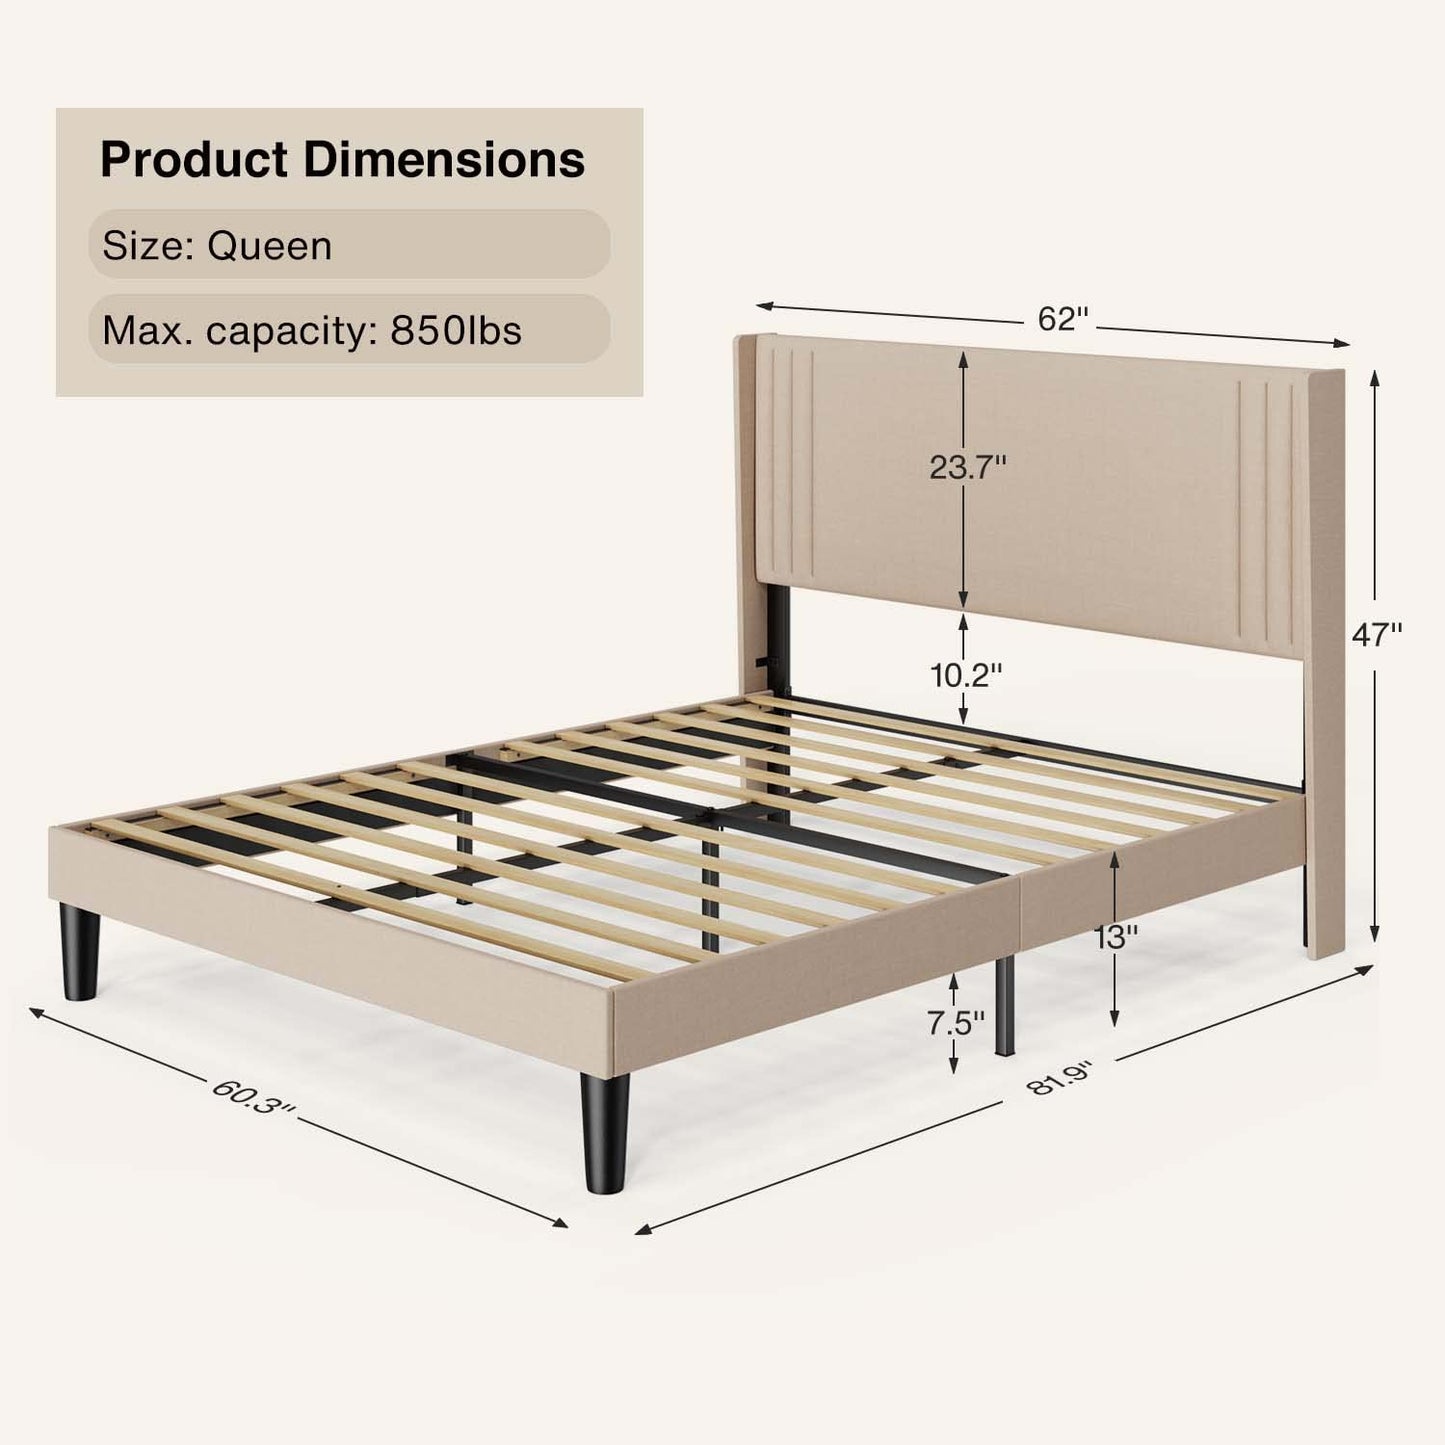 Gizoon Queen Bed Frame with Wingback Headboard, Upholstered Platform Bed with Modern Geometric Headboard, Wooden Slats, Noise-Free, No Box Spring